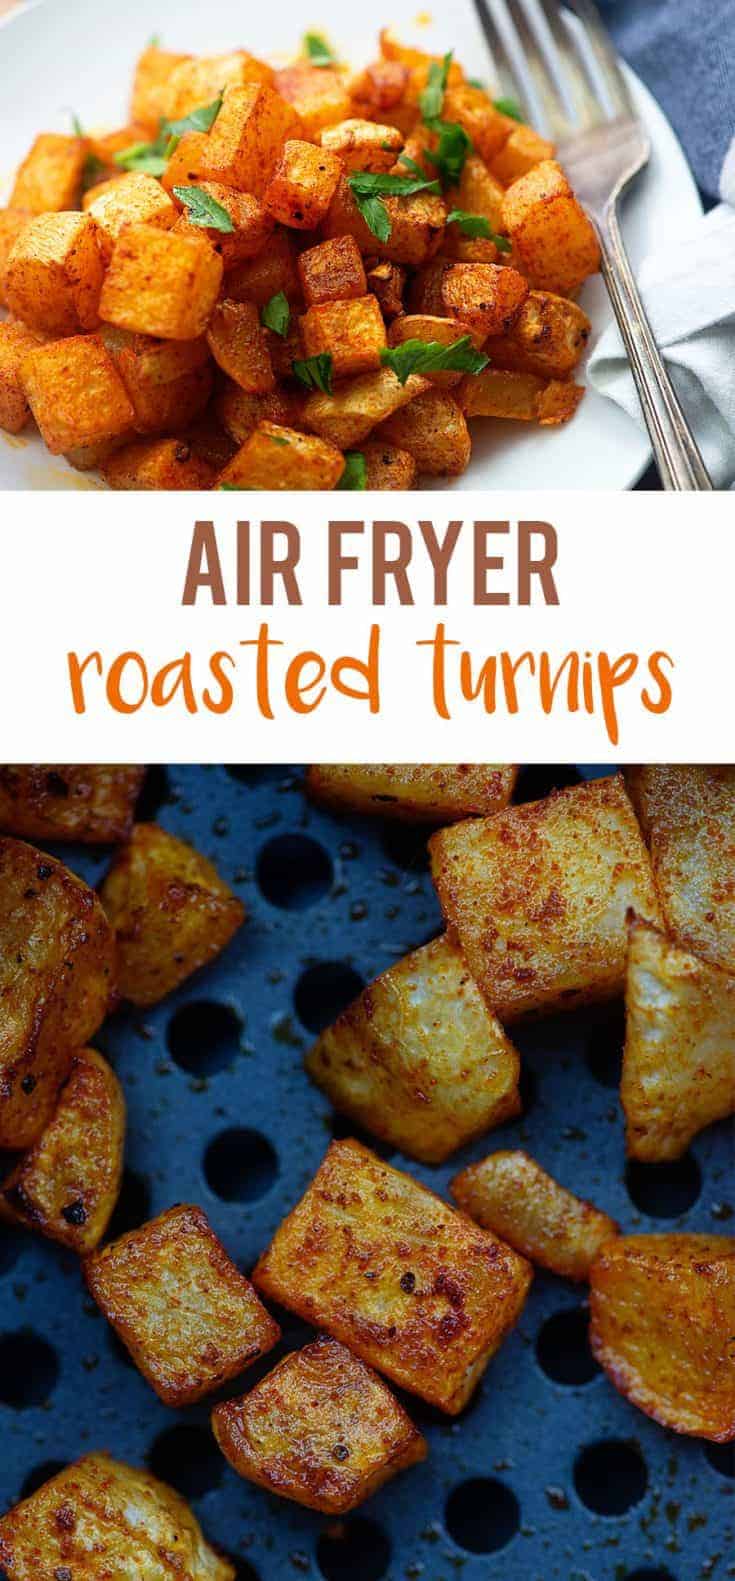 Roasted Turnips (Air Fryer or Oven Recipe) - That Low Carb Life